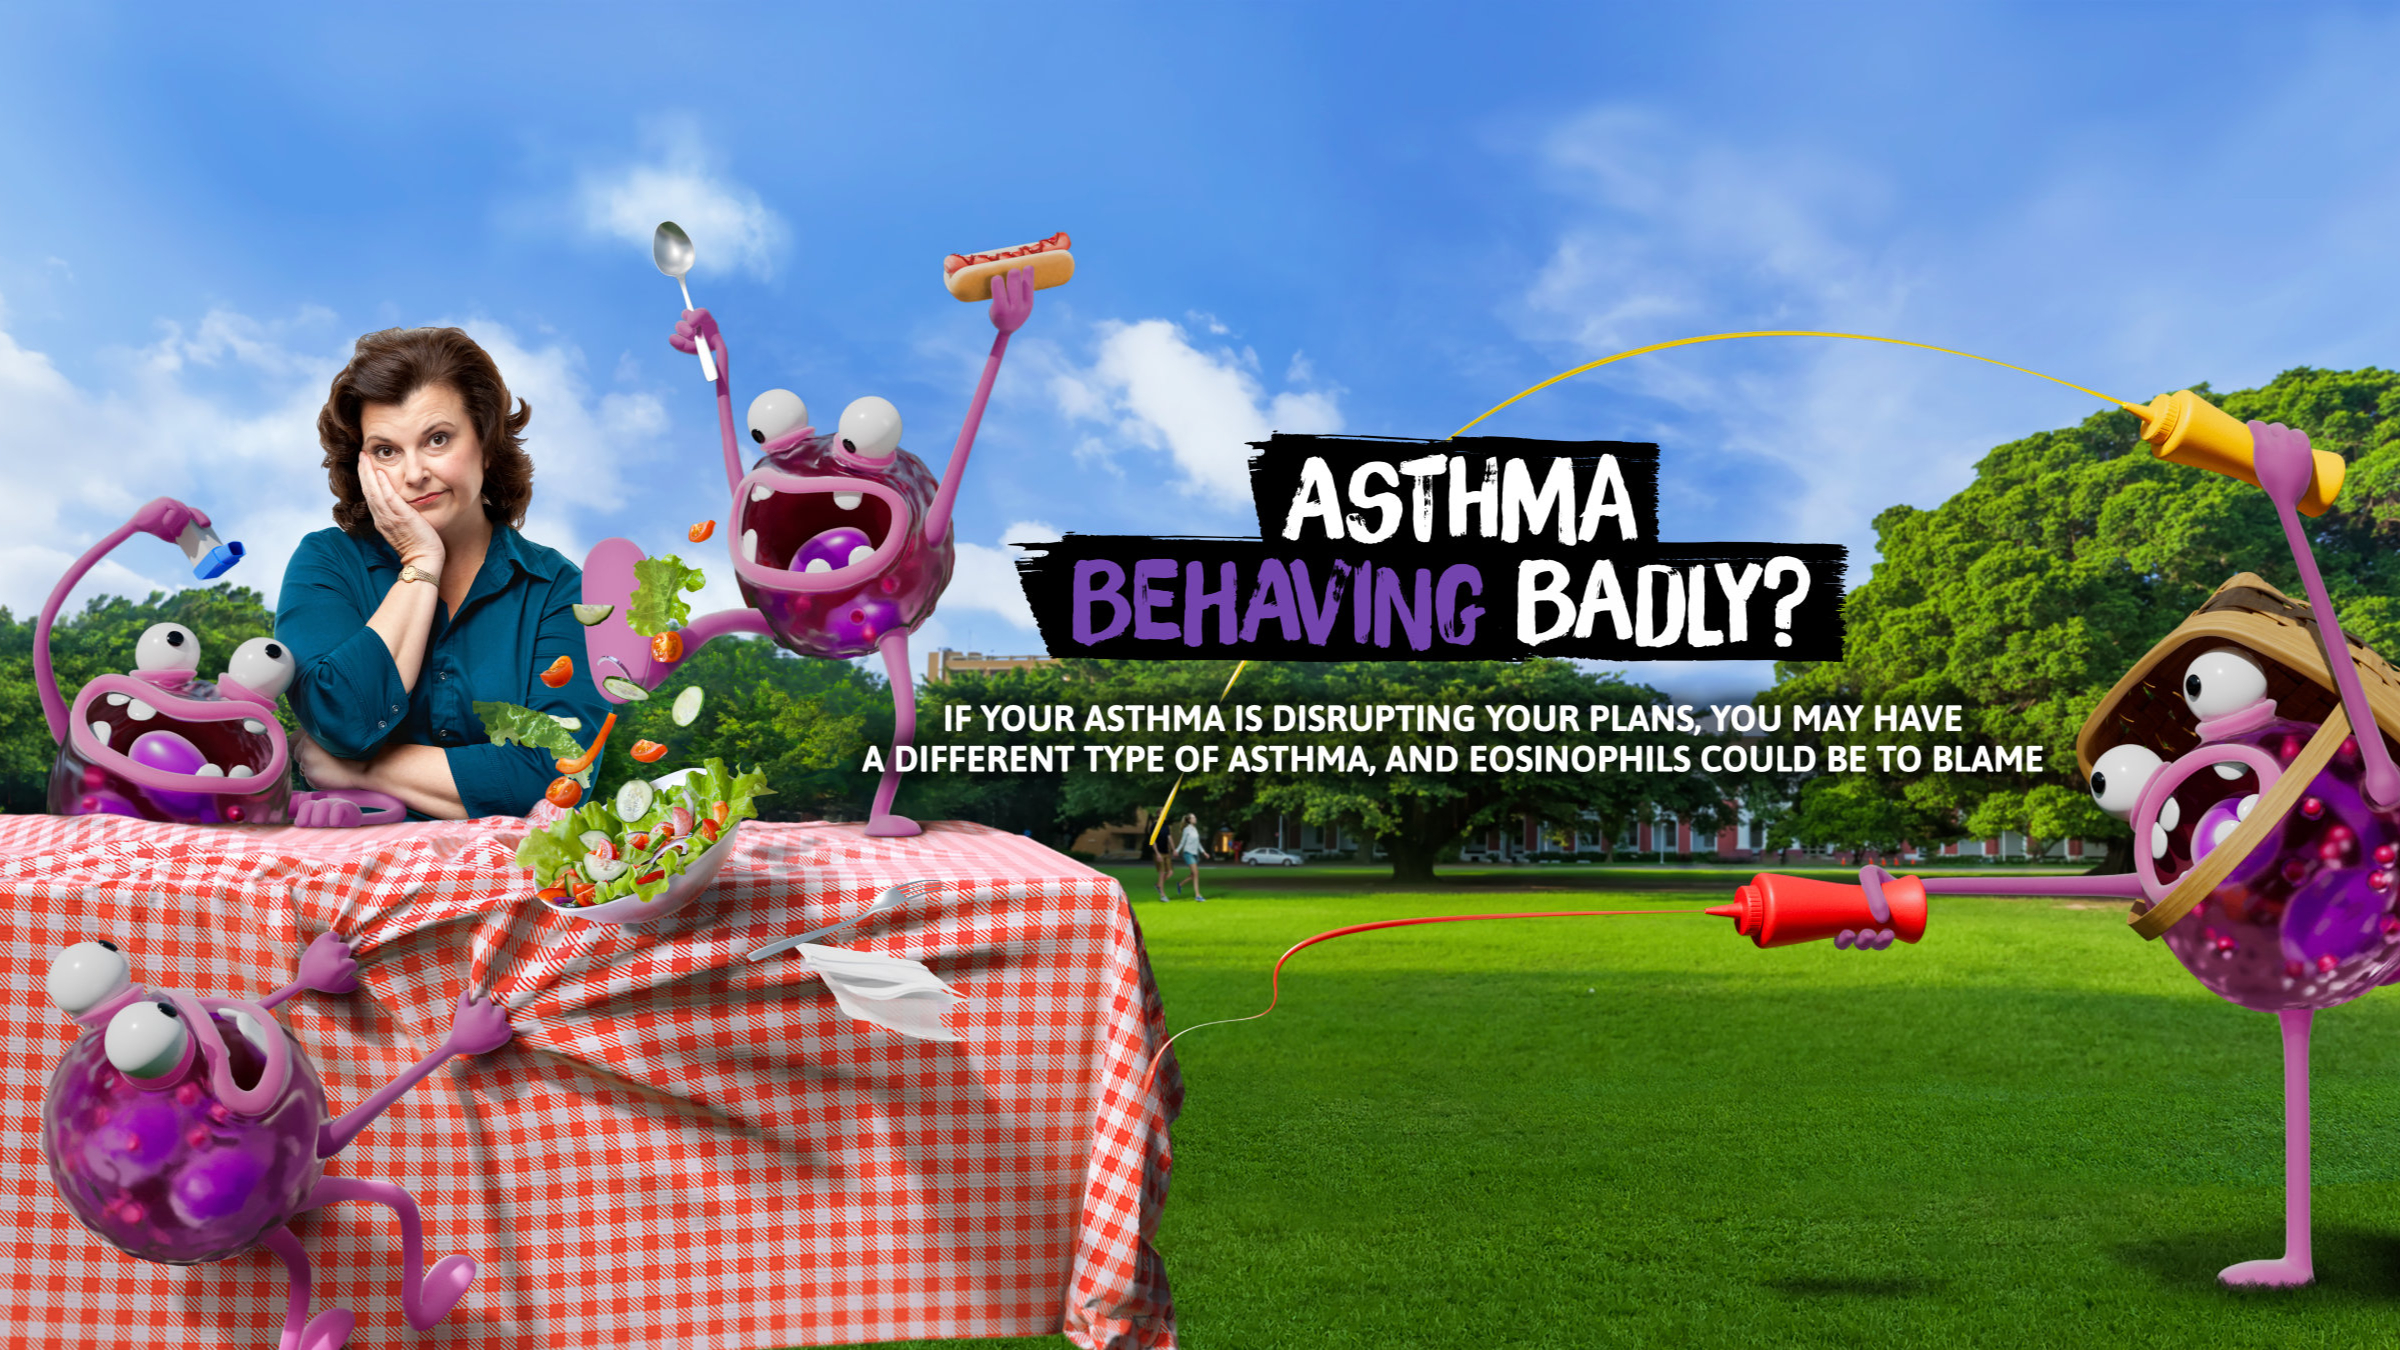 AstraZeneca debuts annoying purple 'Phil' creatures, personified asthma eosinophils 'behaving badly'